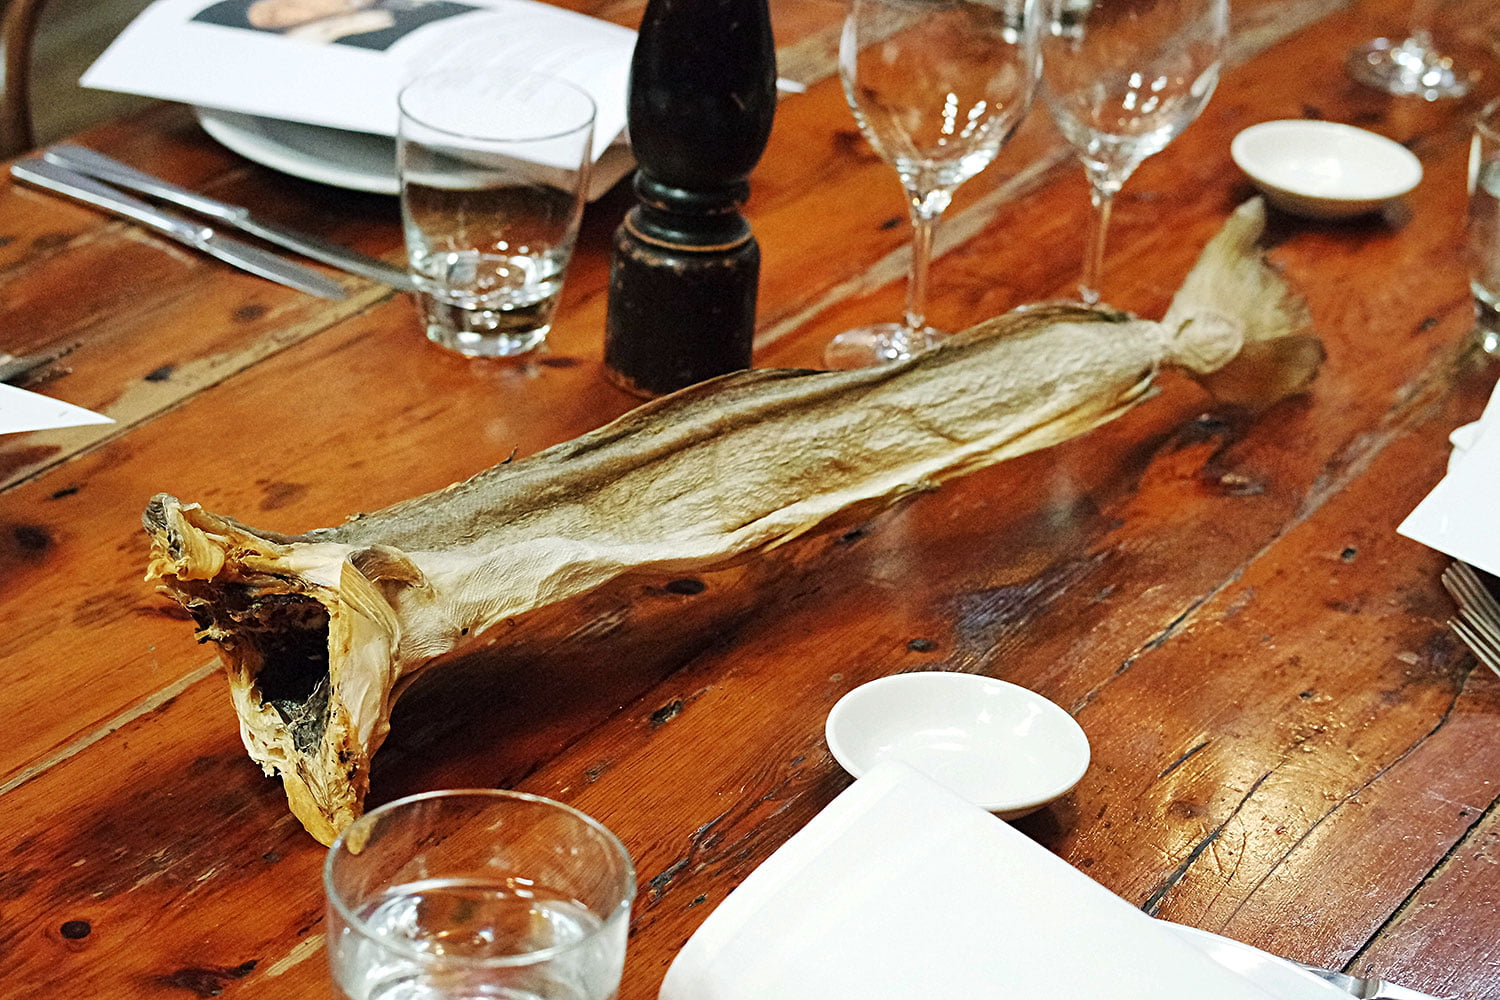 Whole Bakalar - Norwegian dried cod - sitting in the middle of the table